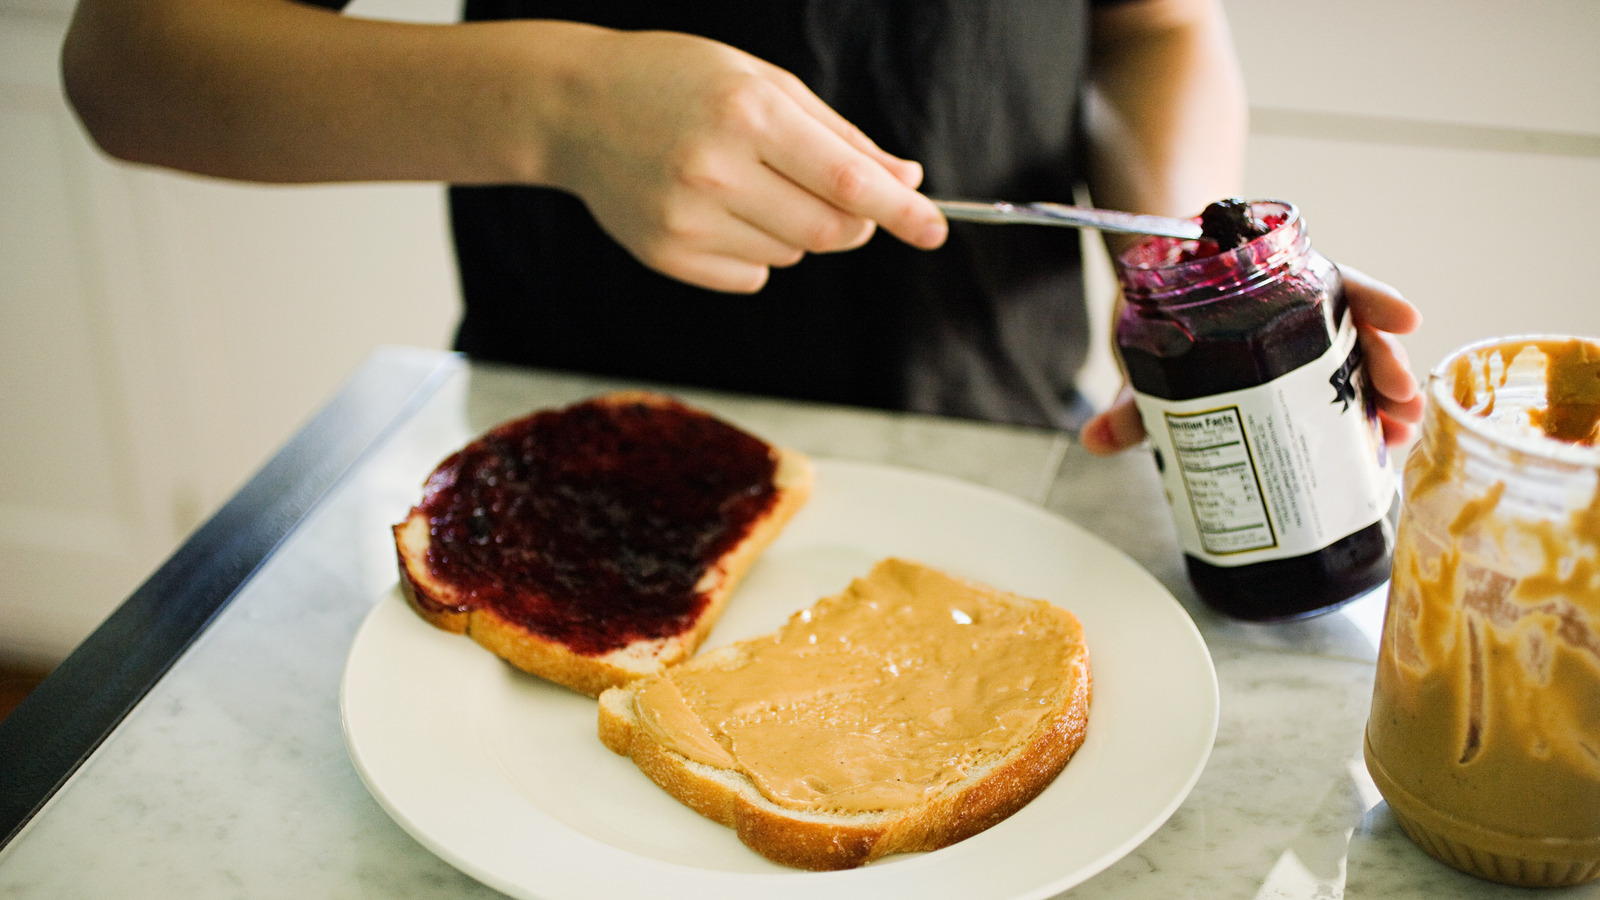 Genius Ways To Make Your Peanut Butter And Jelly Sandwich Healthier - Health Digest